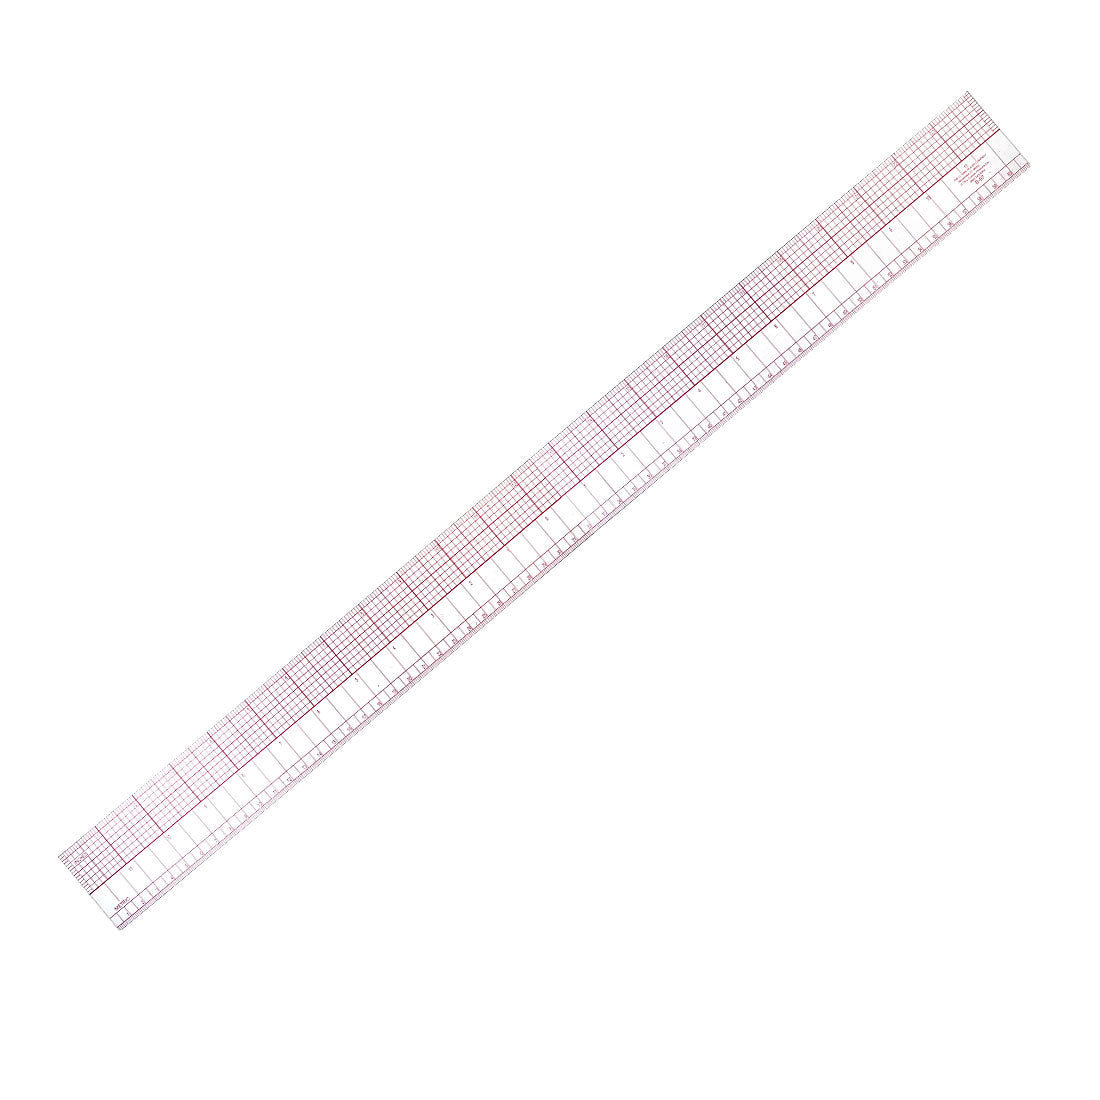 uxcell Uxcell Beveled Ruler 60cm 23 Inch Plastic Transparent B97 Sewing Tool